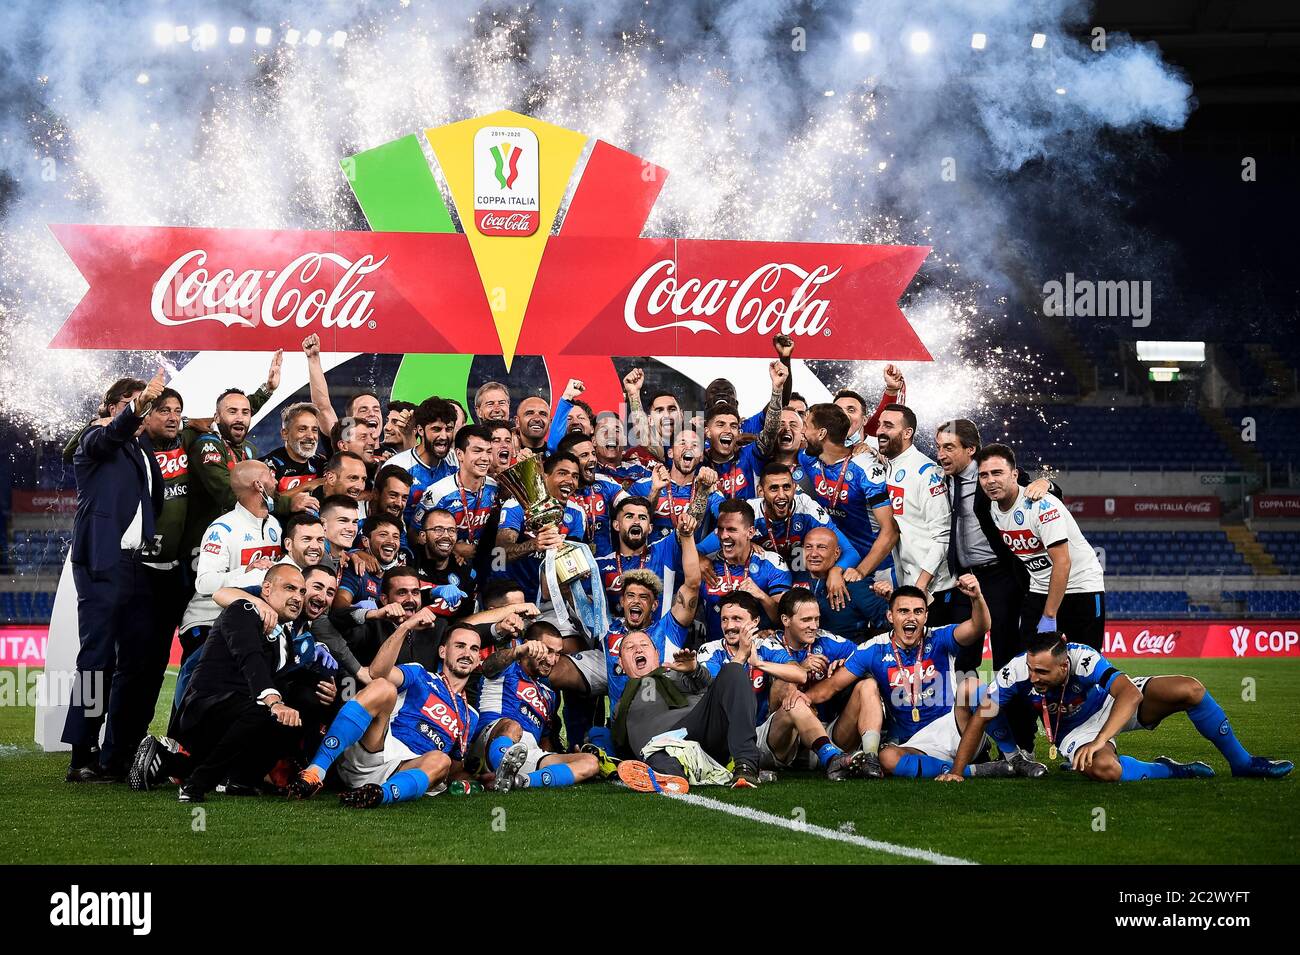 Rome, Italy - 17 June, 2020: Players of SSC Napoli celebrate with the trophy during the awards ceremony at end of the Coppa Italia final football match between SSC Napoli and Juventus FC. SSC Napoli won 4-2 over Juventus FC after penalty kicks, regular time ended 0-0. Credit: Nicolò Campo/Alamy Live News Stock Photo